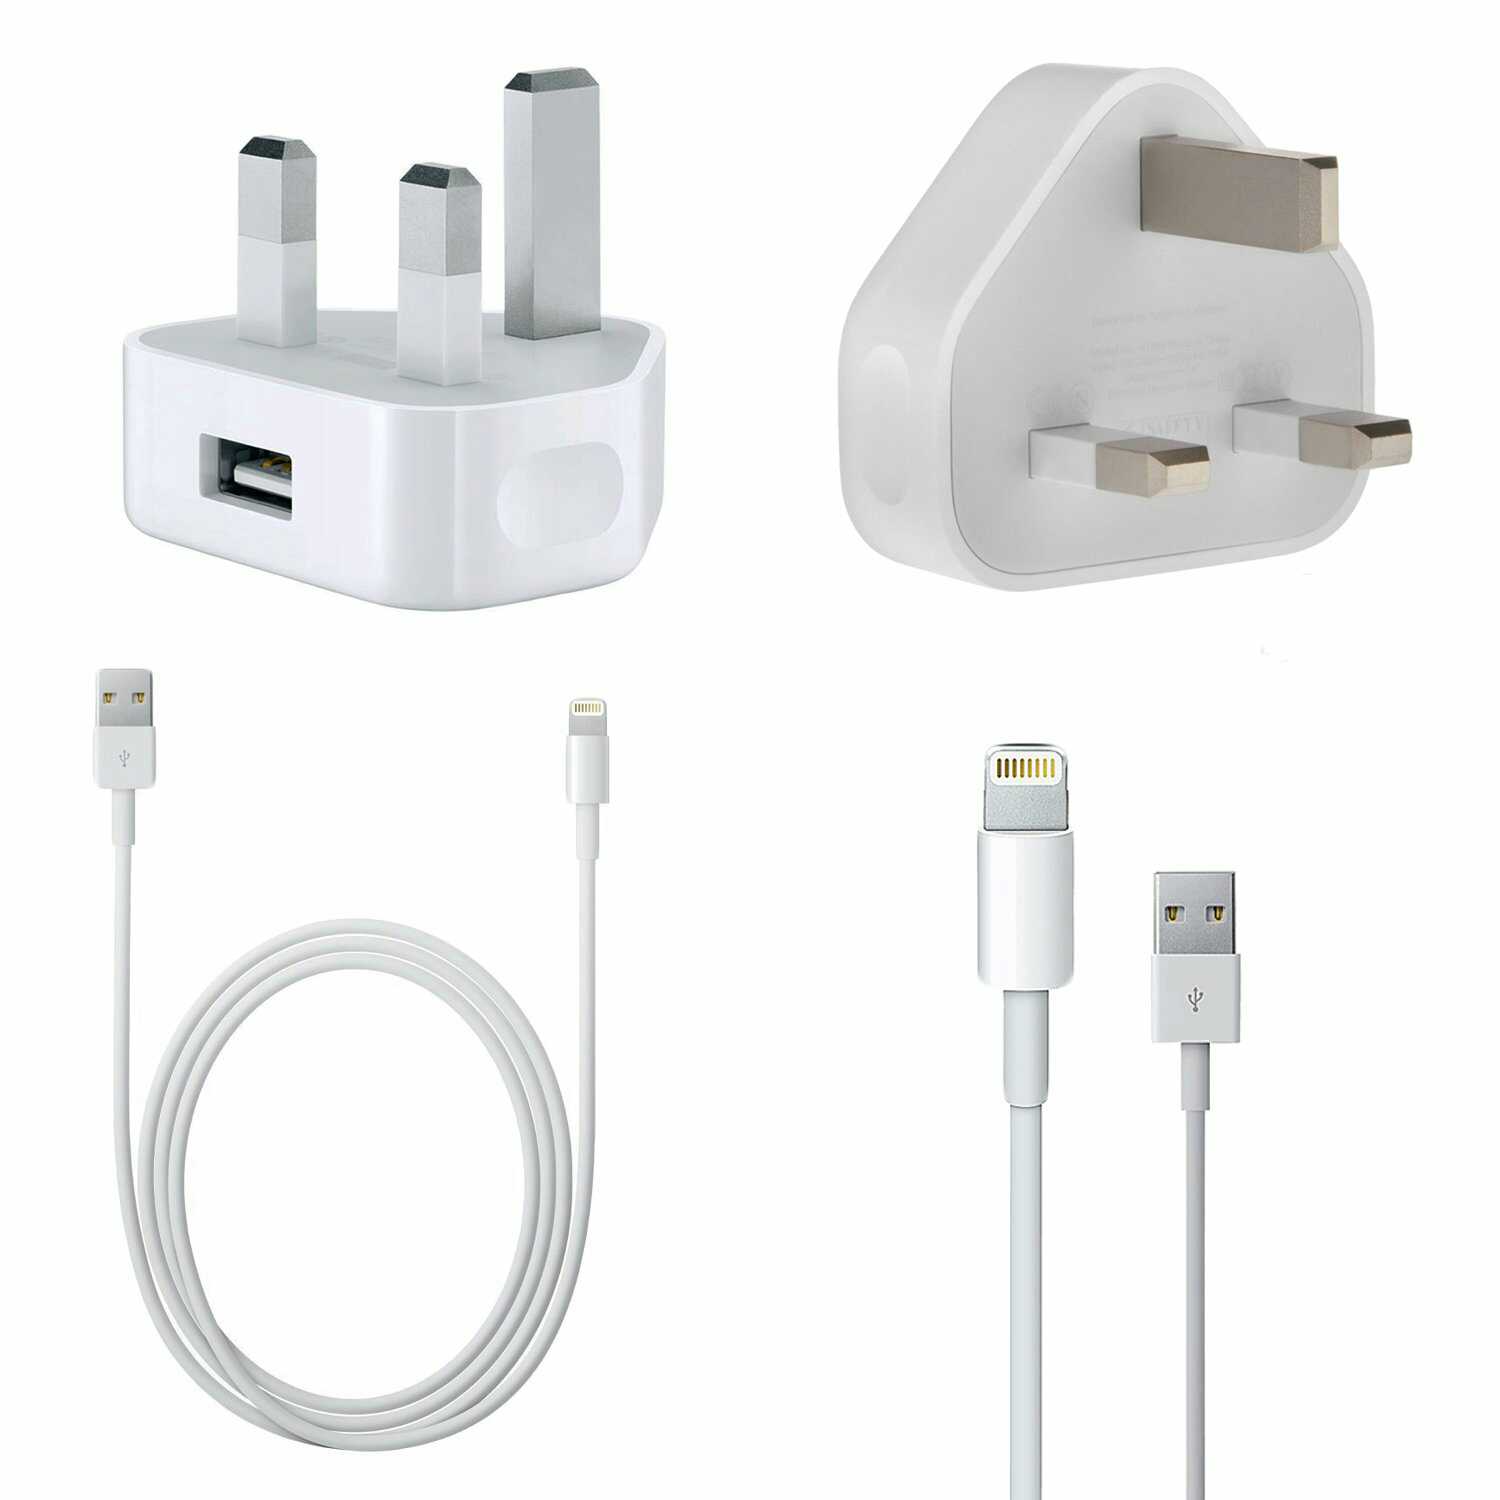 Original Apple iPhone Charger